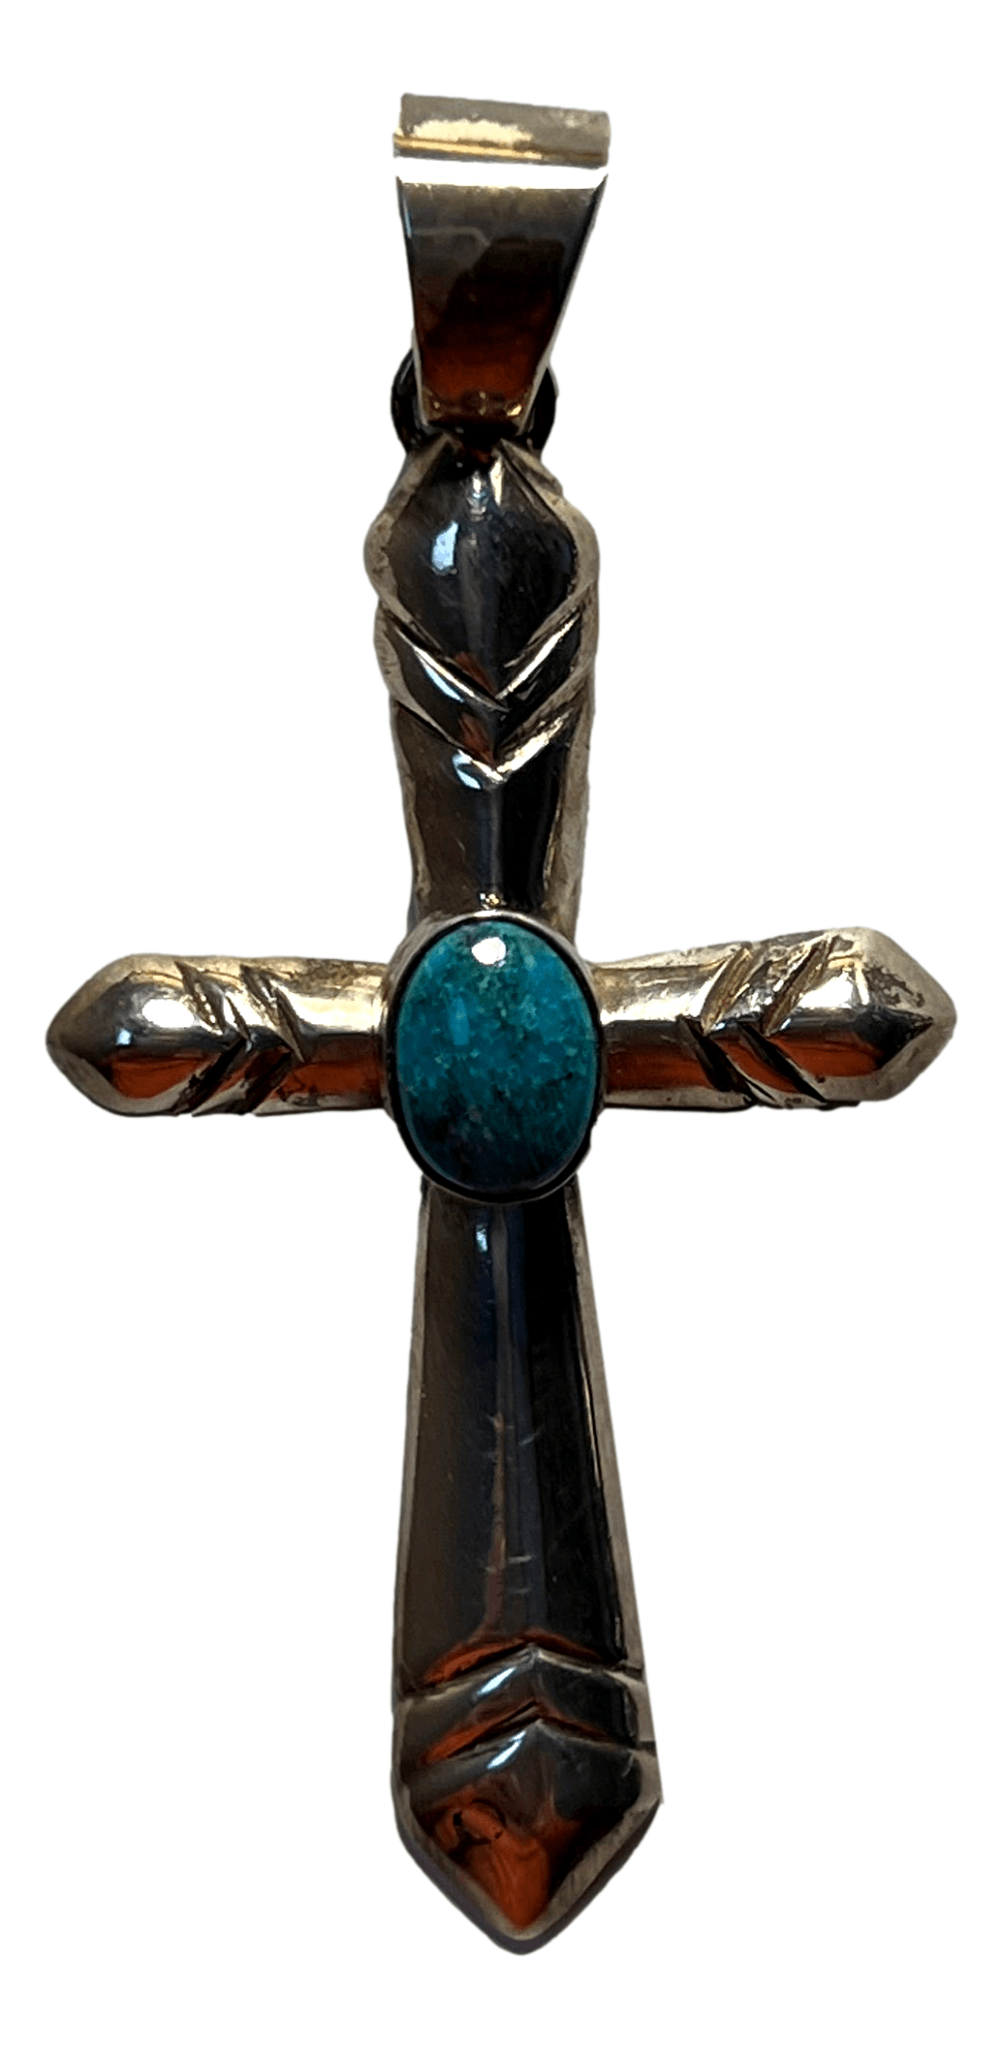 Pendant Cross Sterling Silver Handcrafted Skilled Native American Artisans 2 H Inch Stamped Arrow Design Large Oval Turquoise Center - Ysleta Mission Gift Shop- VOTED El Paso's Best Gift Shop